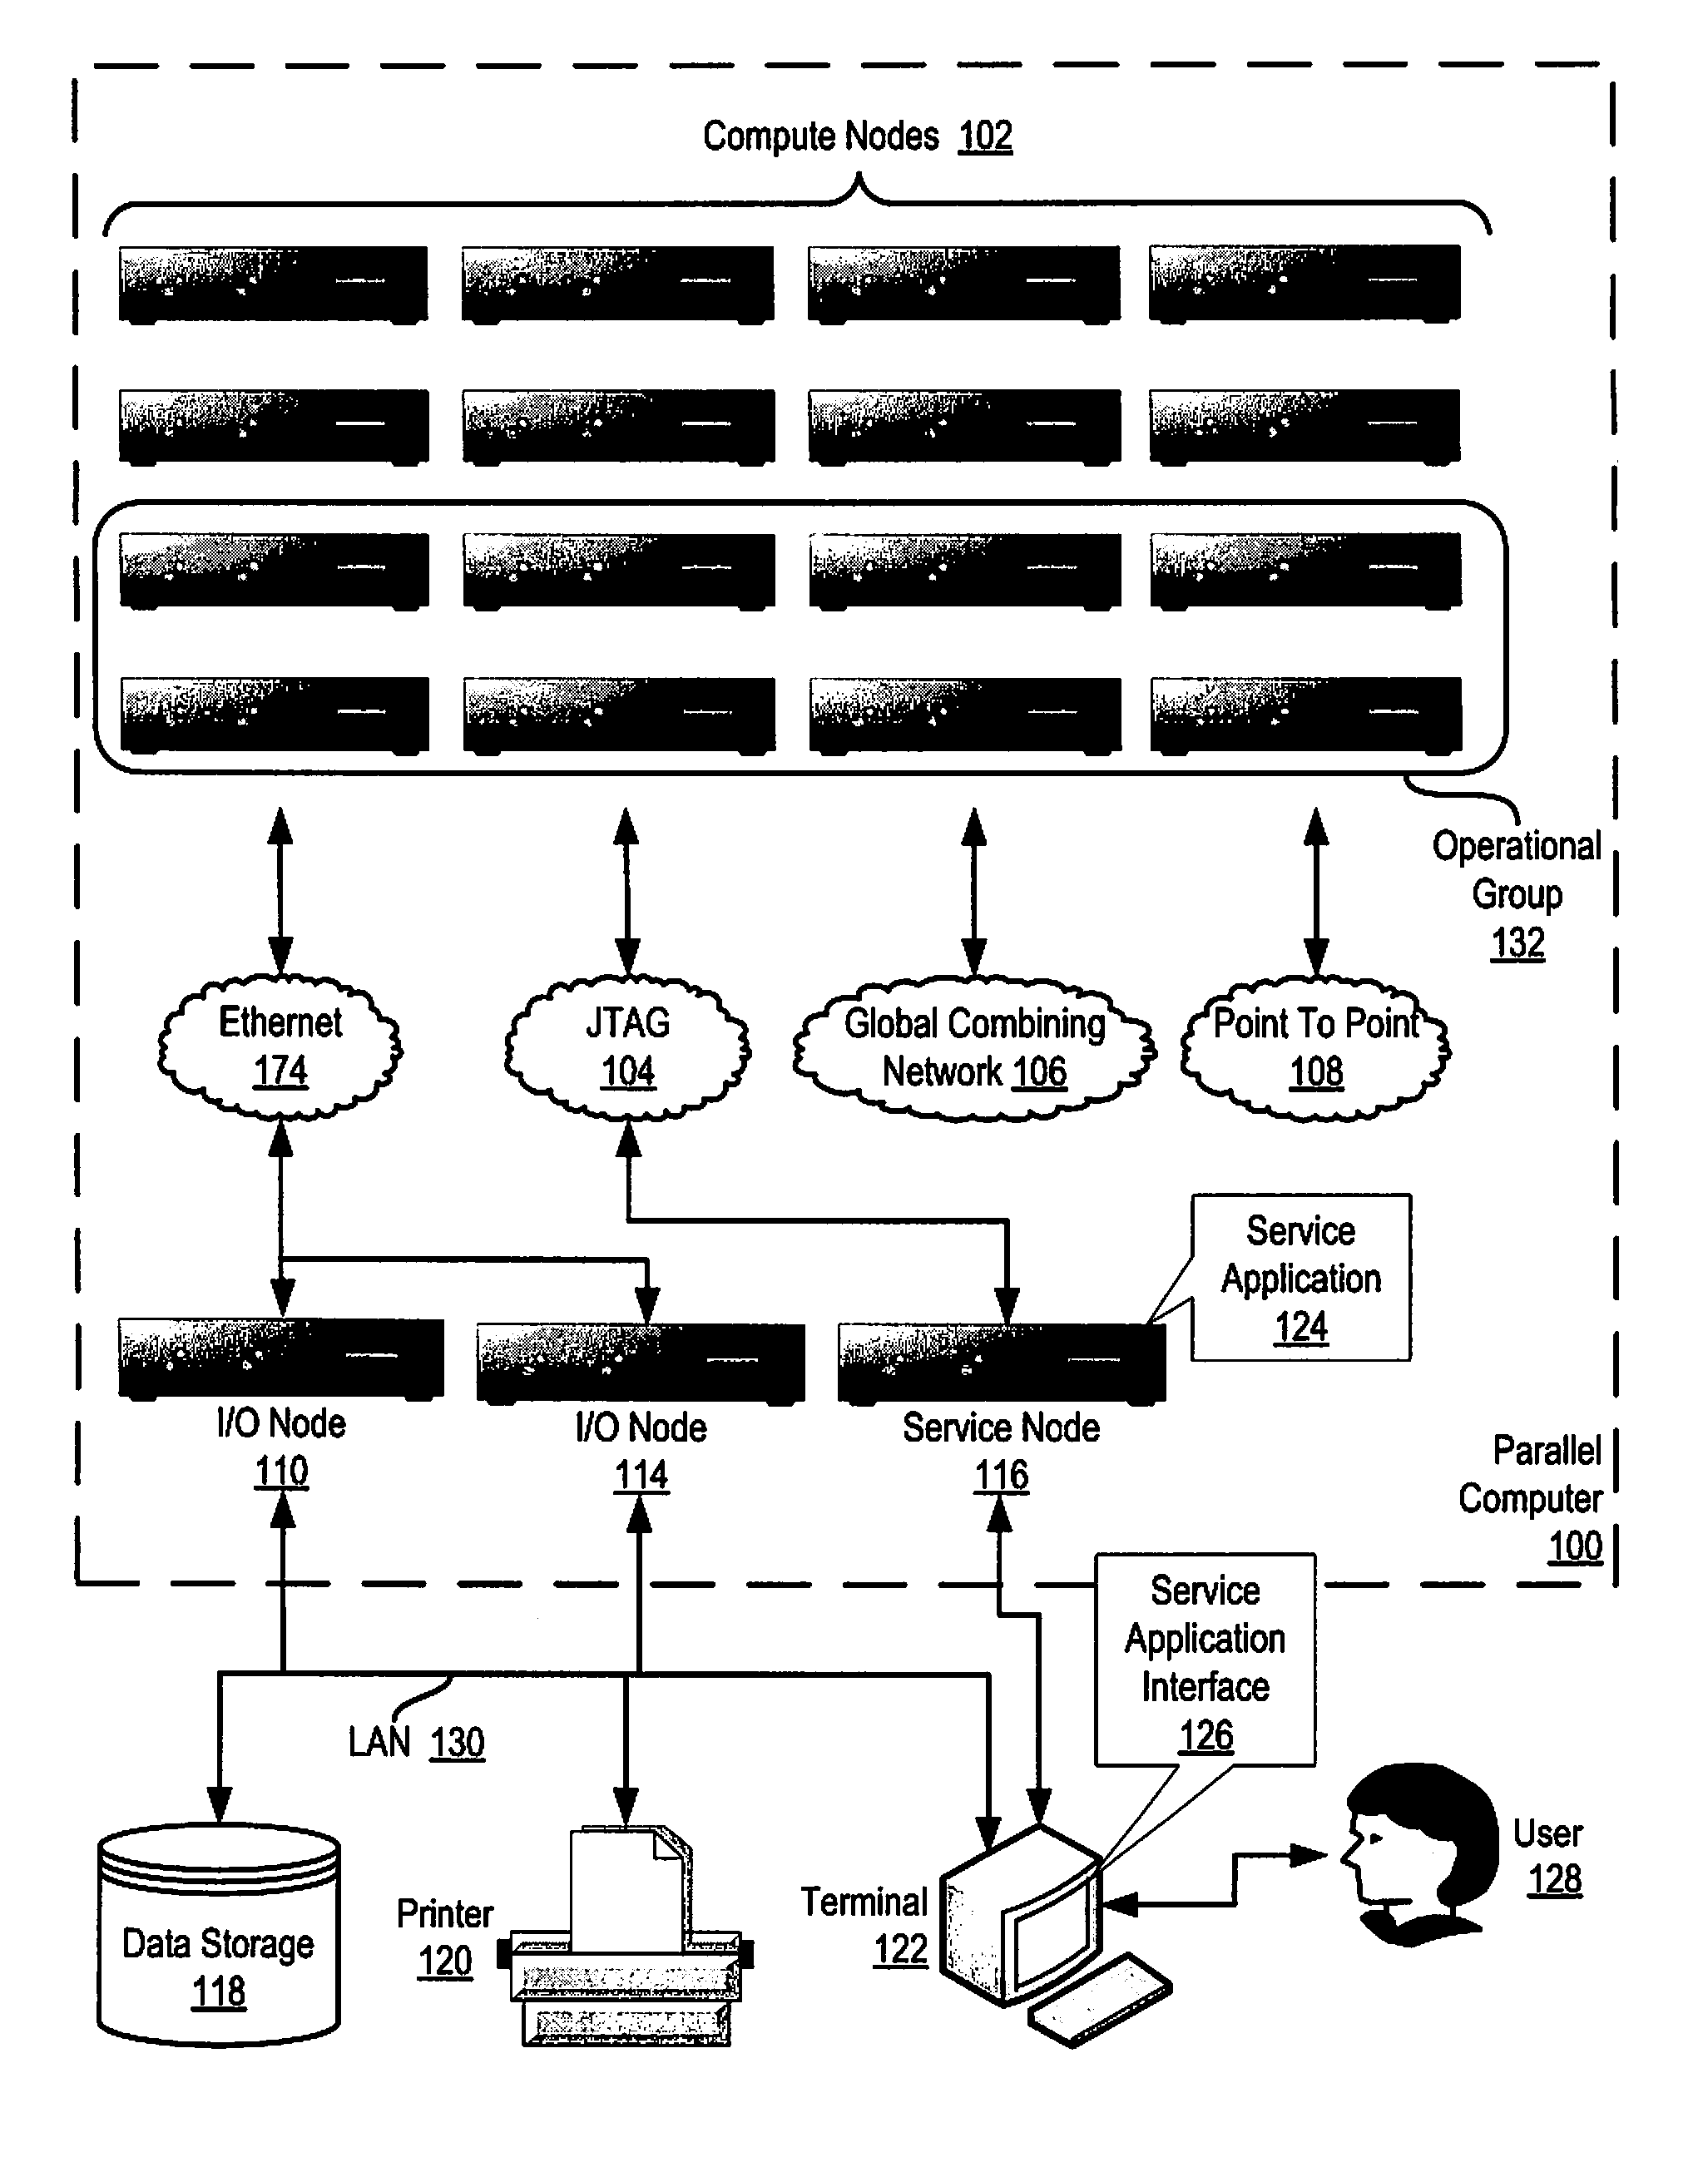 Pacing a Data Transfer Operation Between Compute Nodes on a Parallel Computer